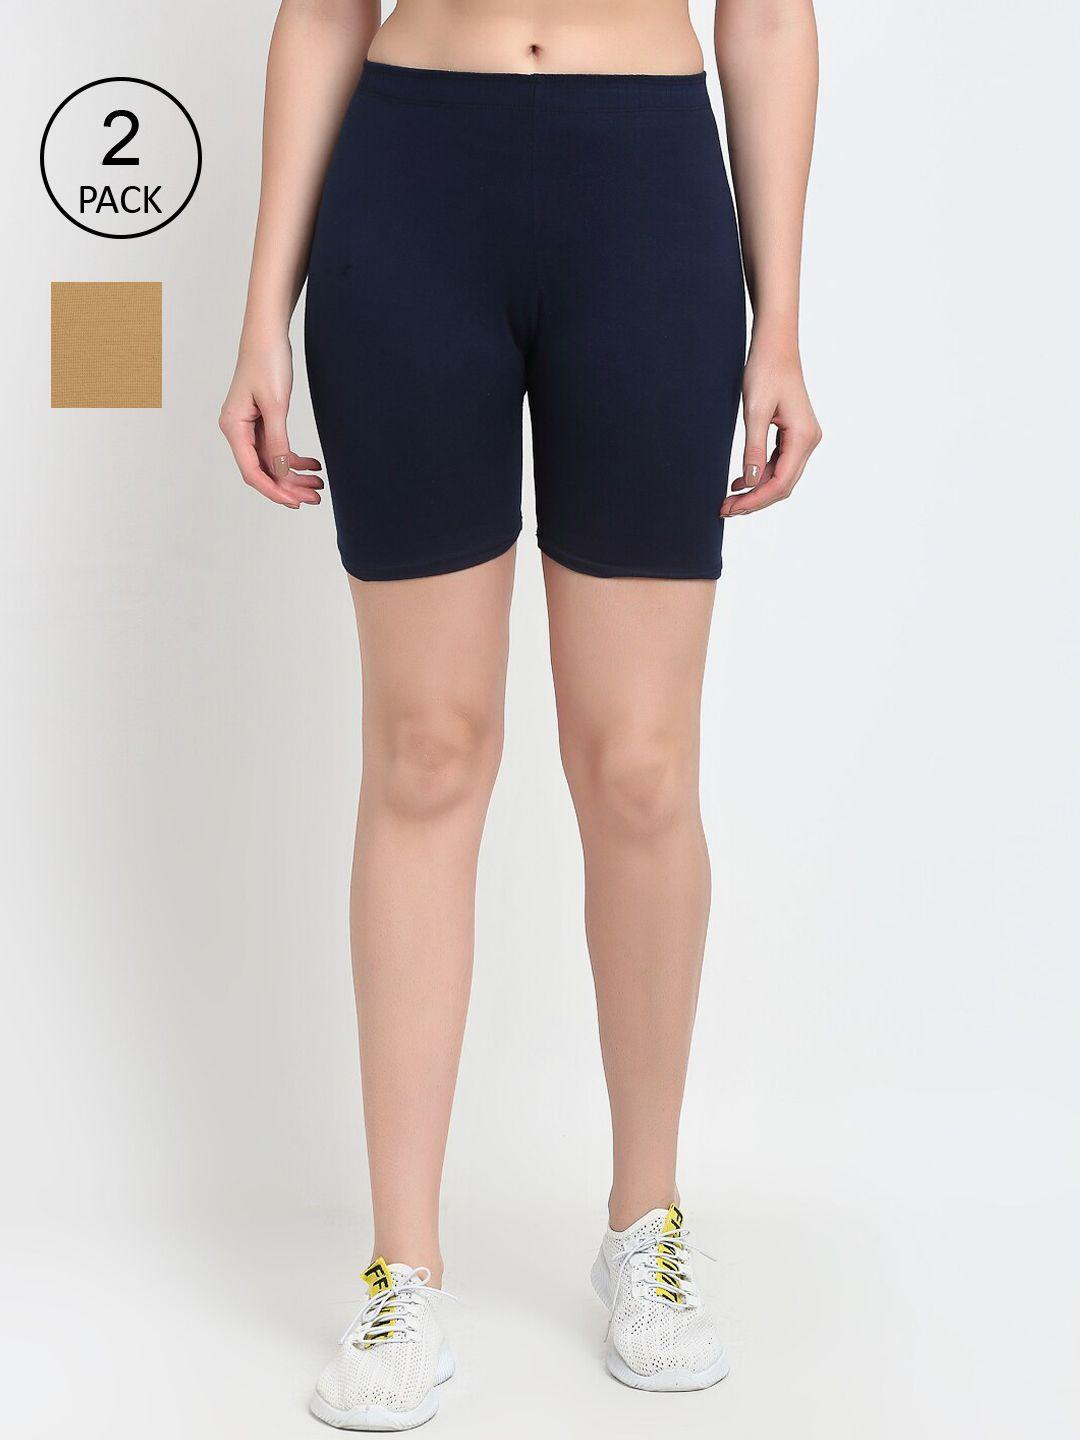 gracit women pack of 2 navy blue & nude cycling sports shorts